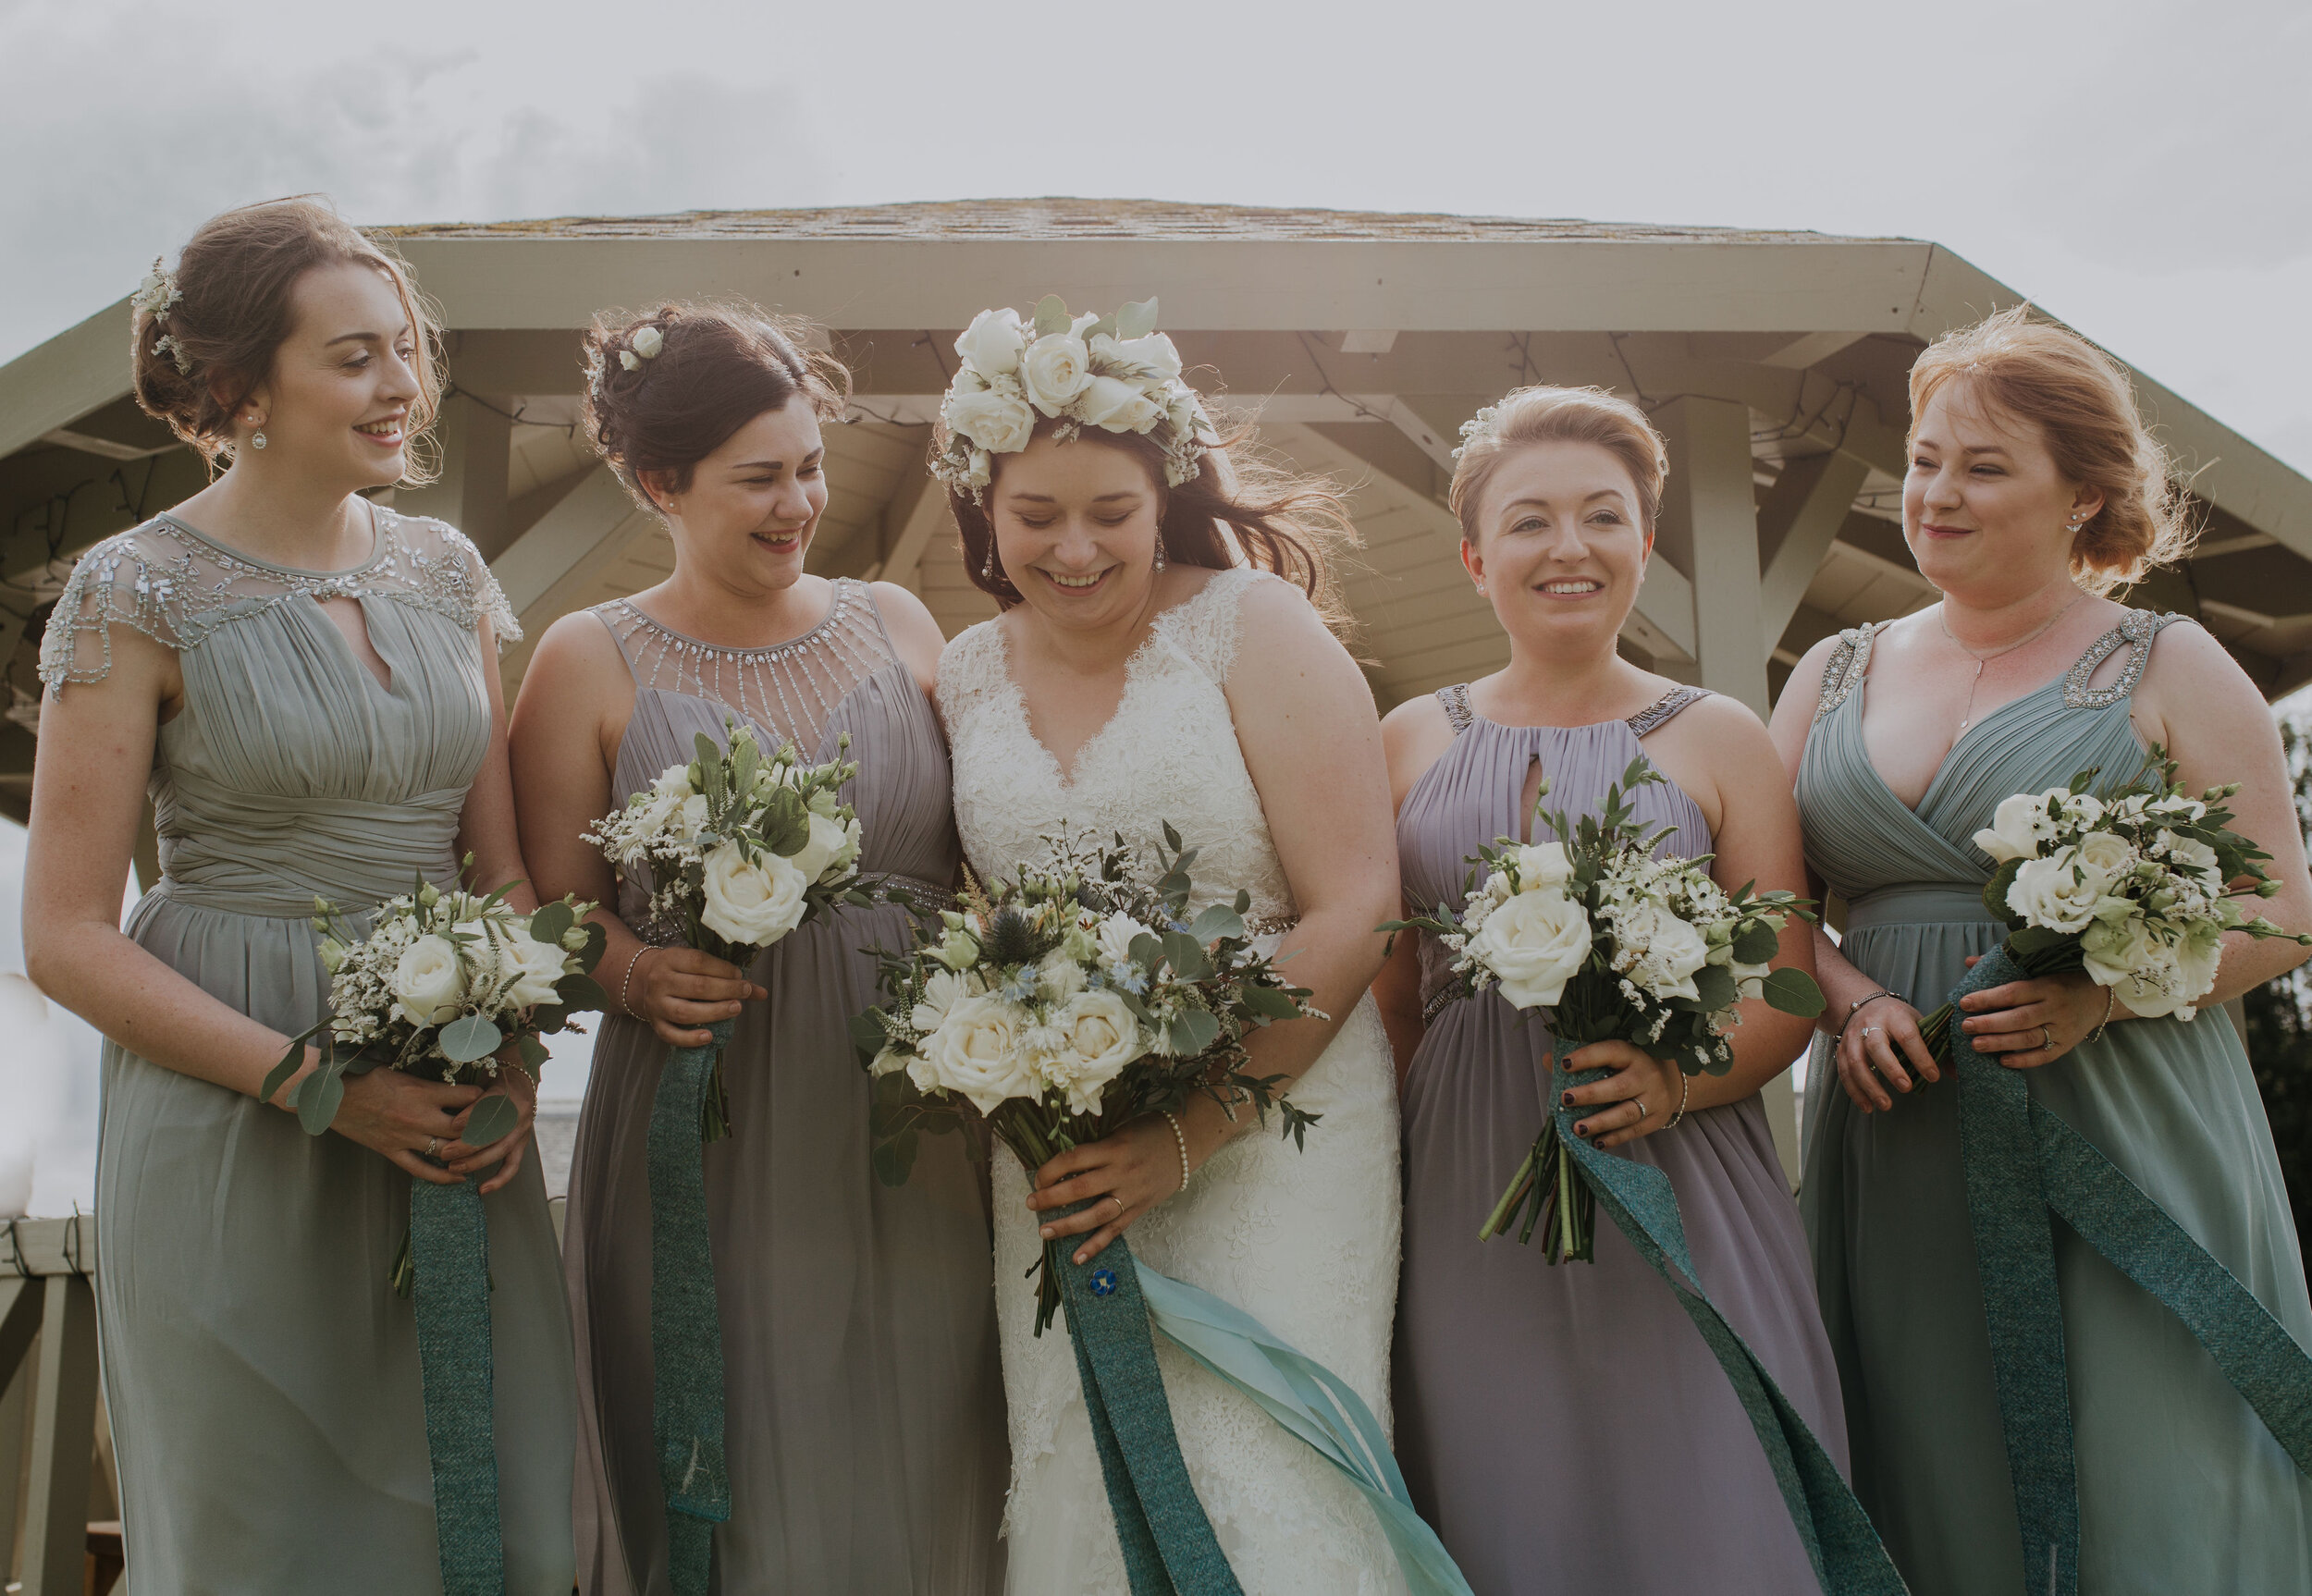 Scottish Bride and Bridesmaids laughing and holding wedding flowers at Bachilton Barn, Perthshire.